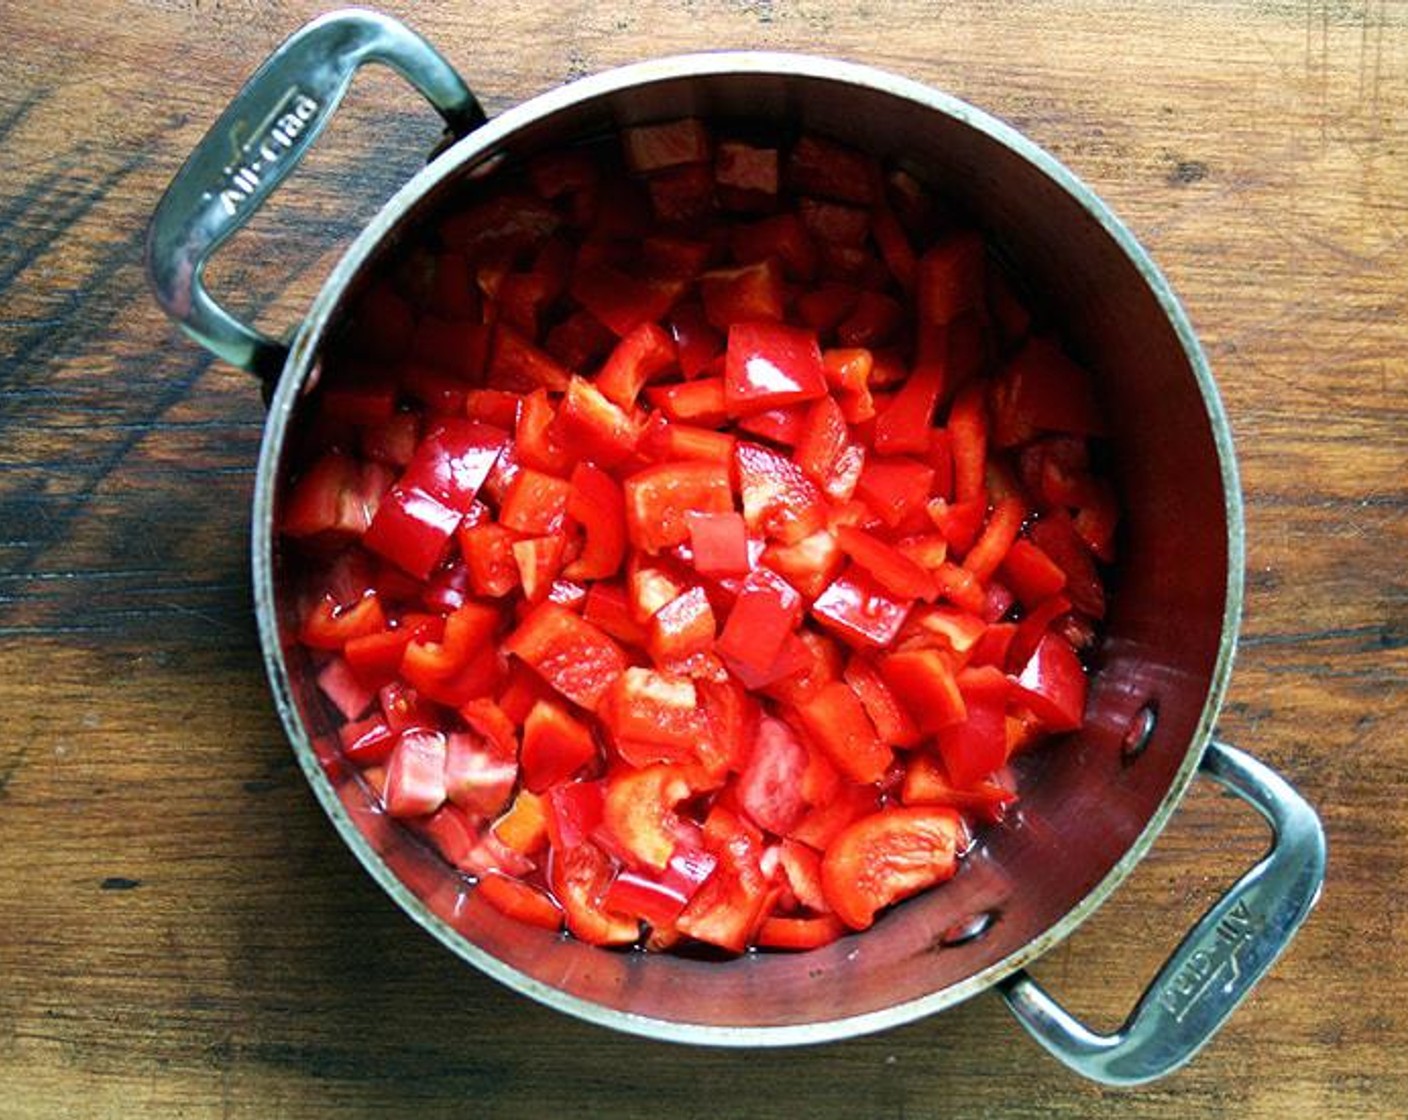 step 1 Place Red Bell Peppers (2) and Beefsteak Tomatoes (2) in a medium-sized saucepan or pot. Pour in Water (1/2 cup) and turn the heat to high. Season with Kosher Salt (1 tsp) and Freshly Ground Black Pepper (1 tsp). Bring to a simmer, then turn heat down to medium-high. Set a timer for 25 minutes.